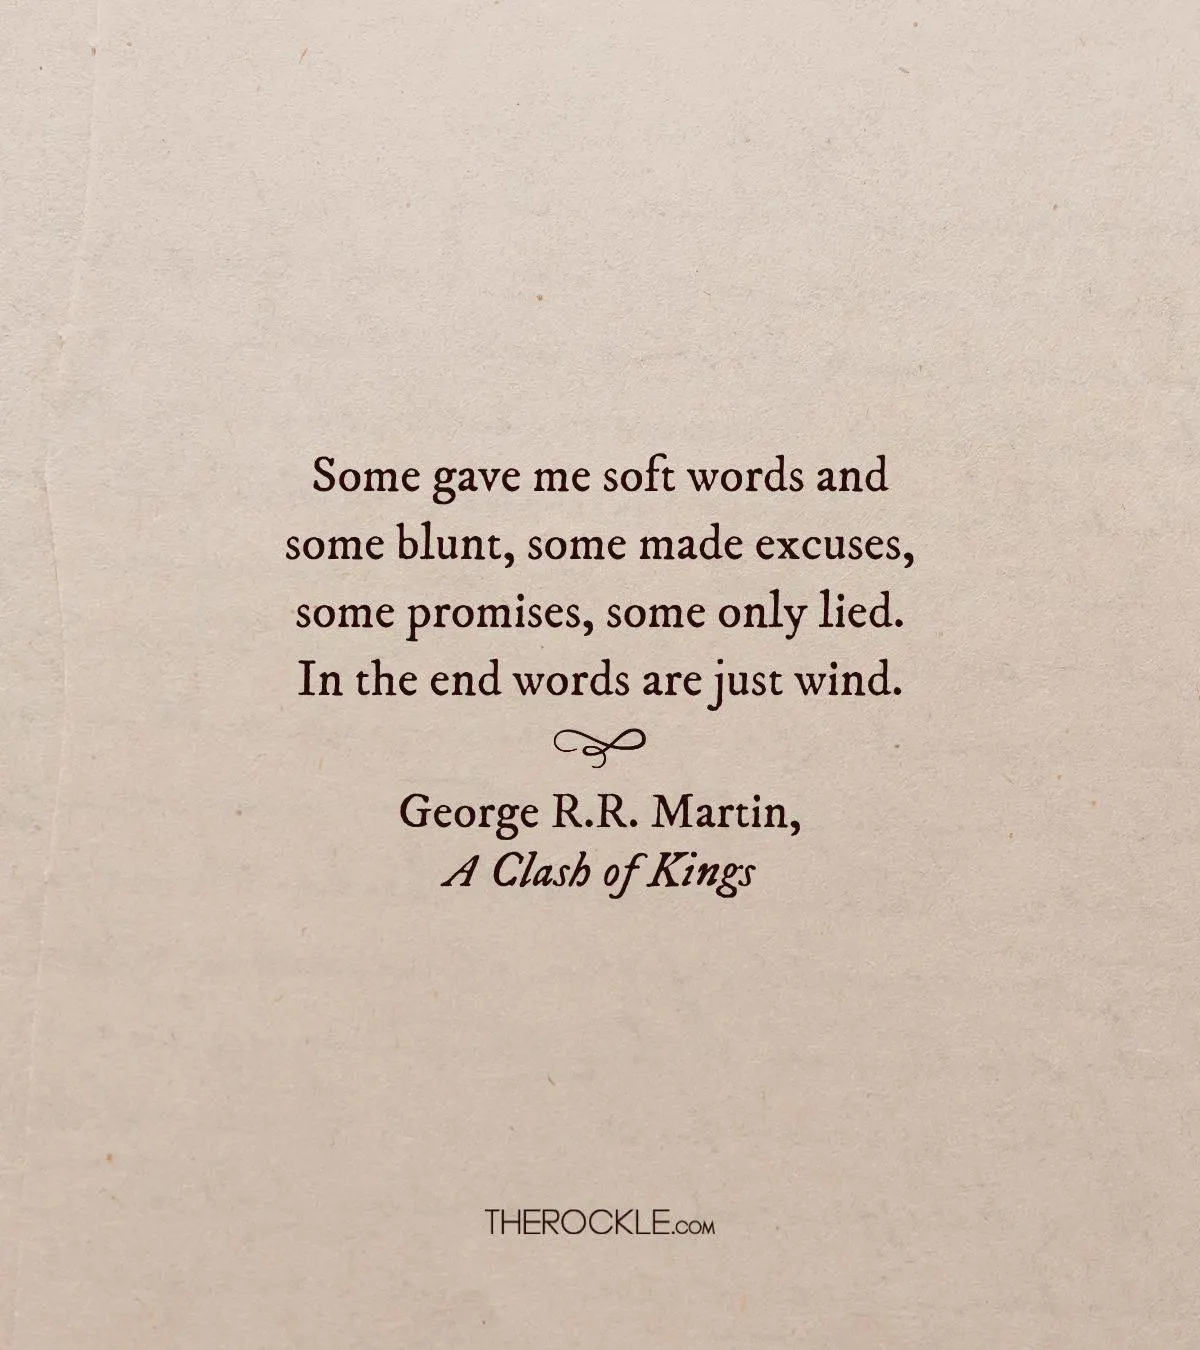 George R.R. Martin on meaningless words